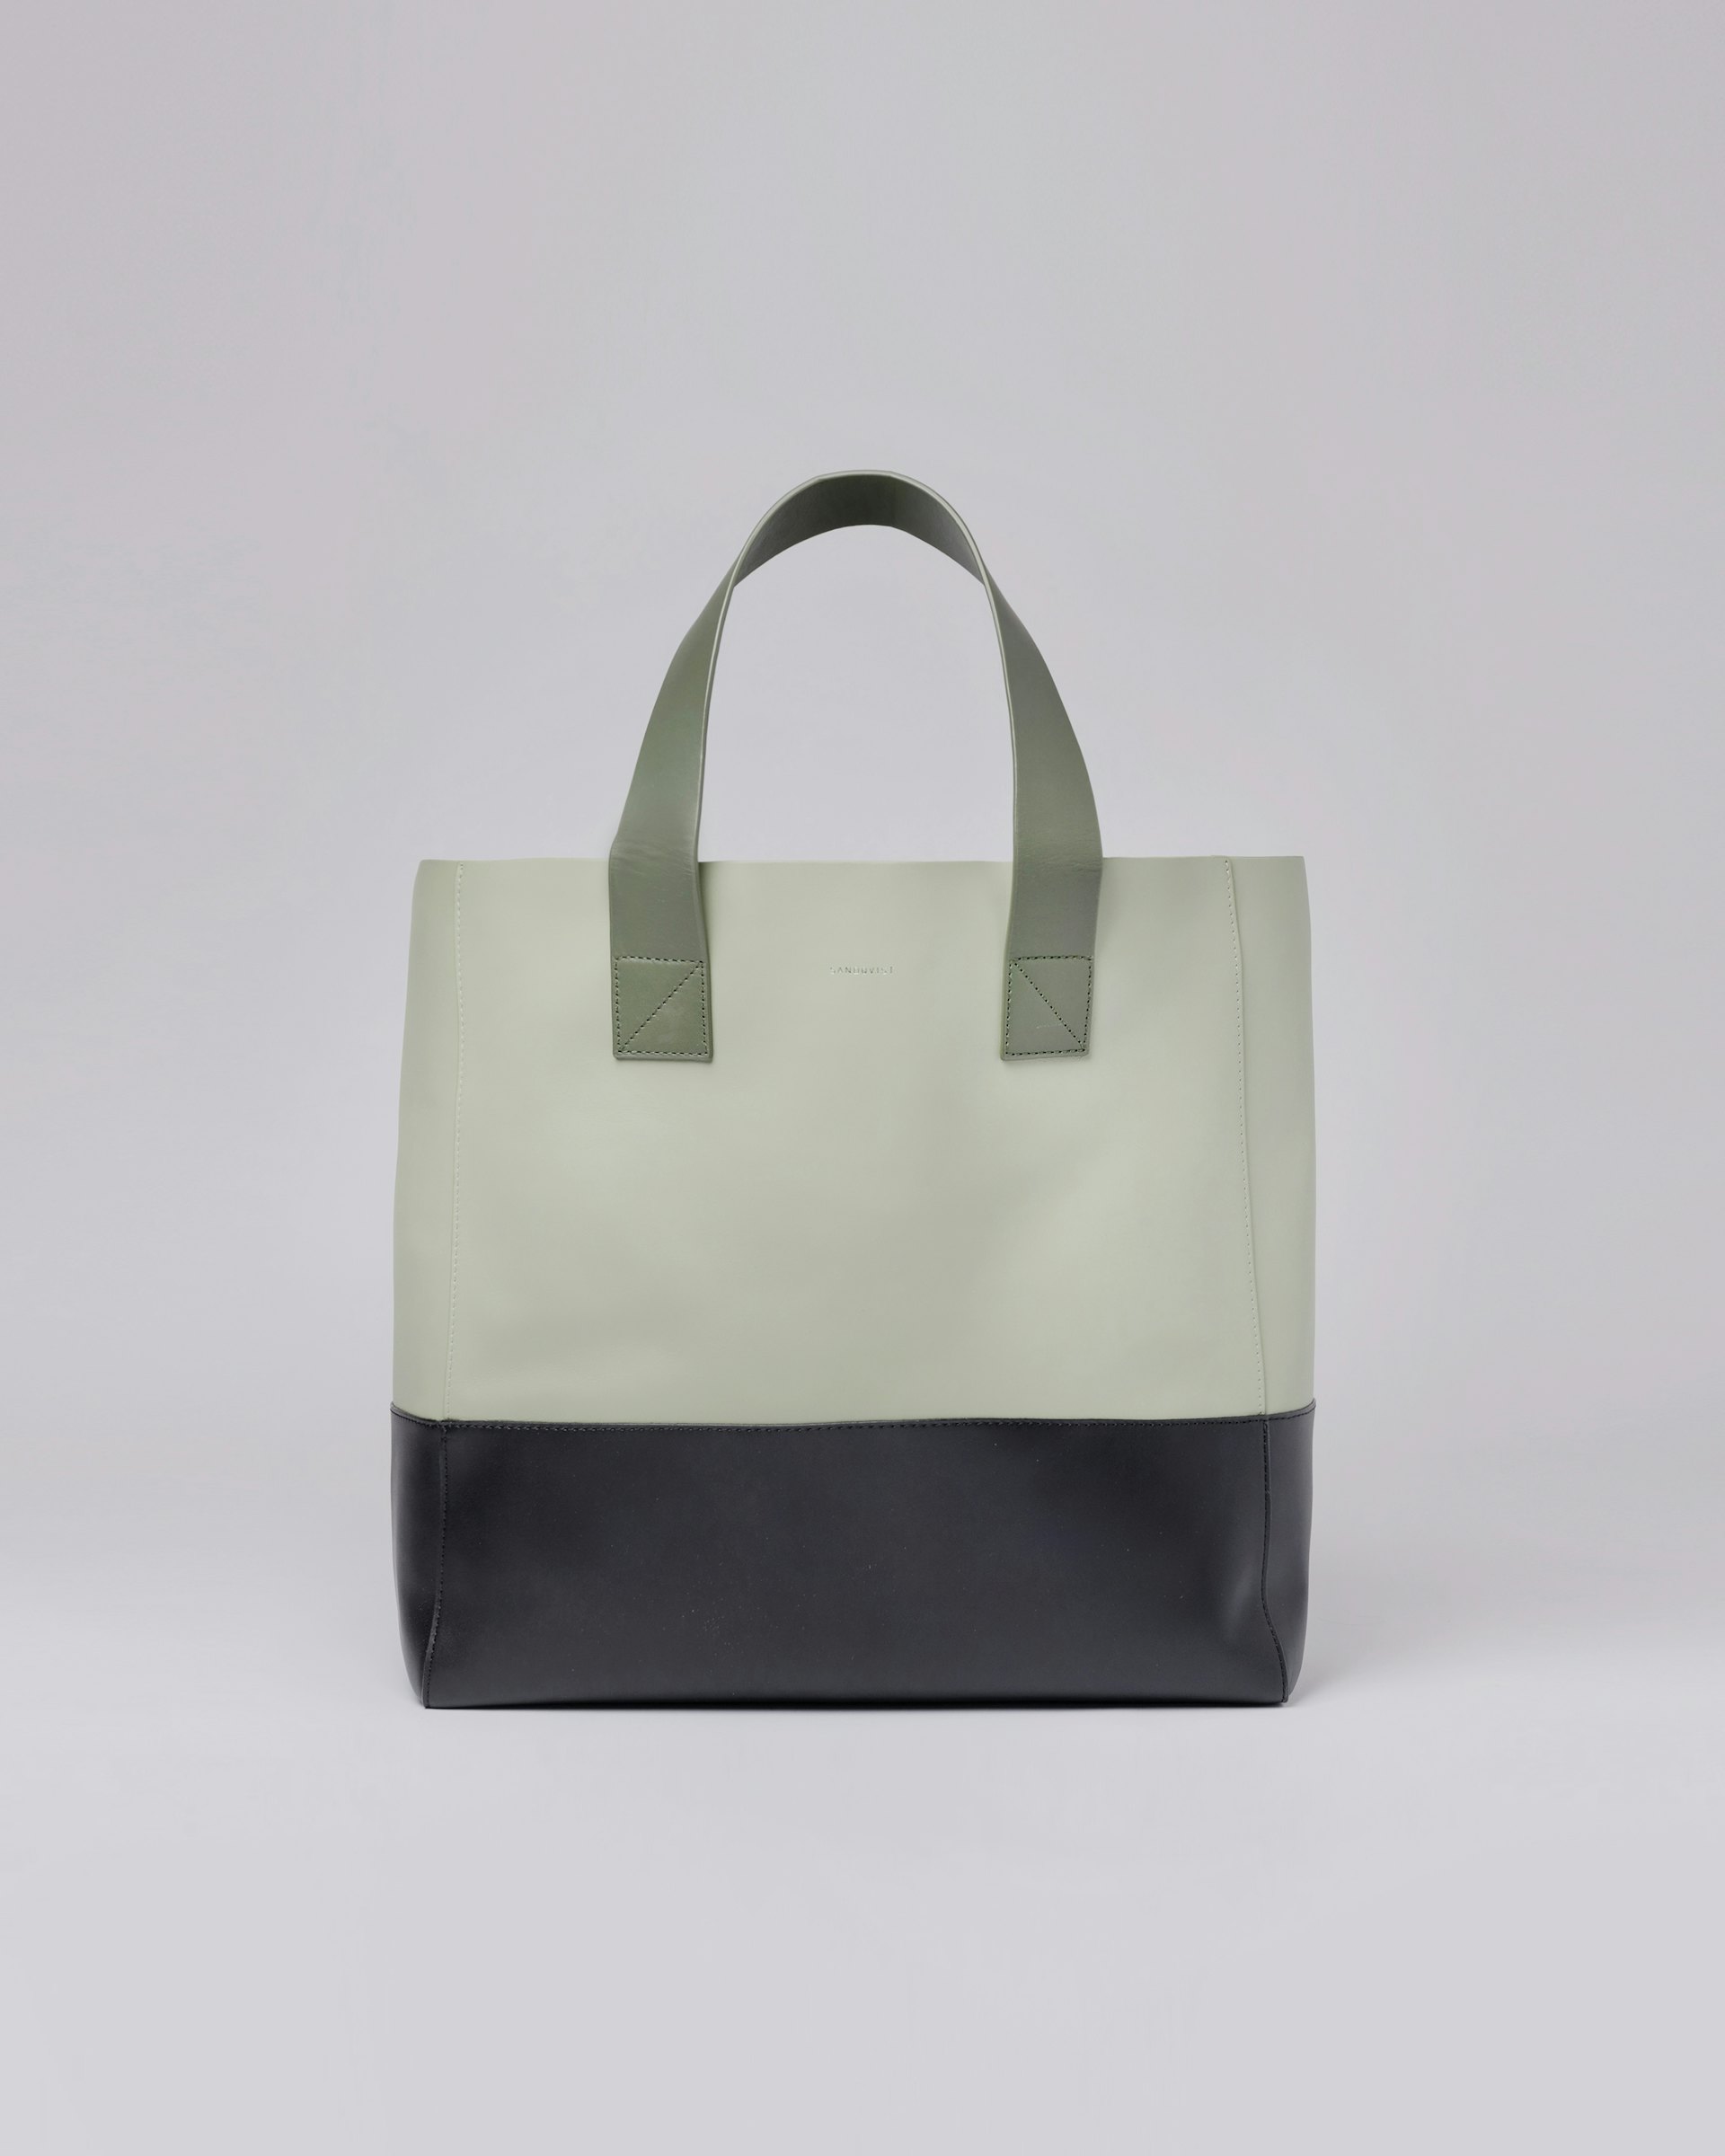 Iris belongs to the category Shoulder bags and is in color green